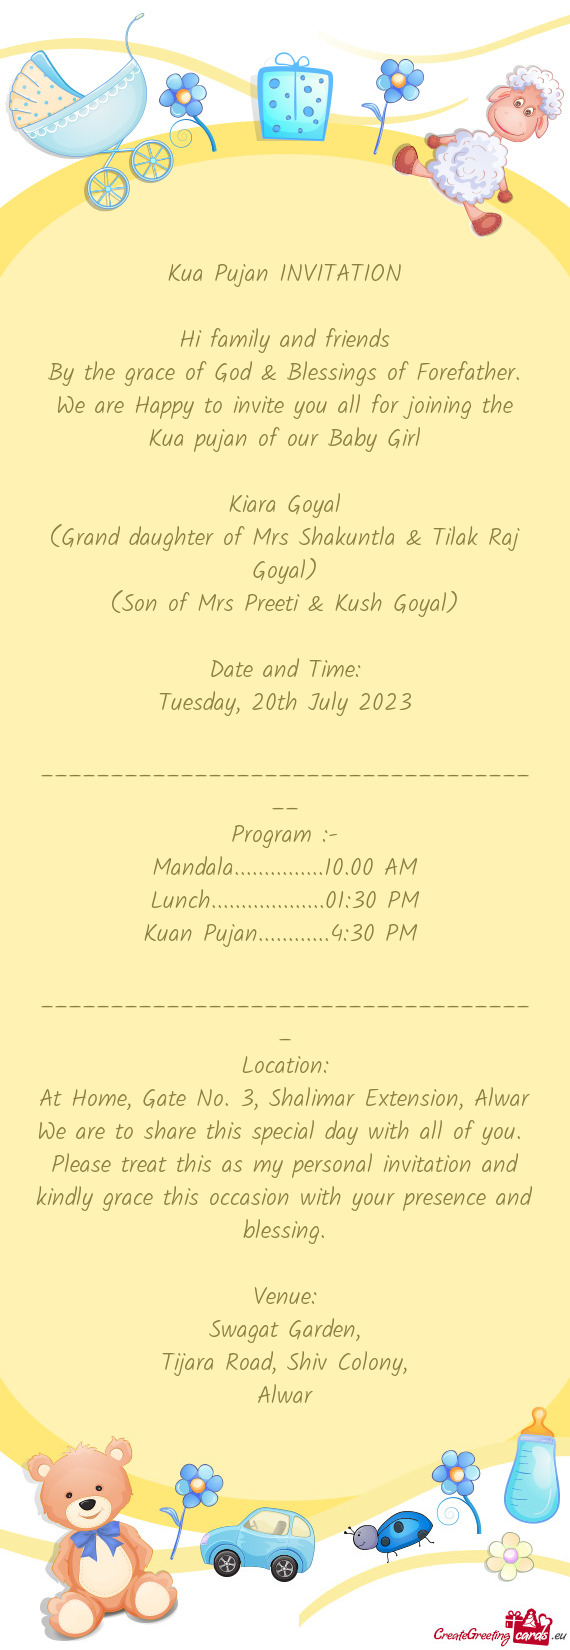 We are Happy to invite you all for joining the Kua pujan of our Baby Girl